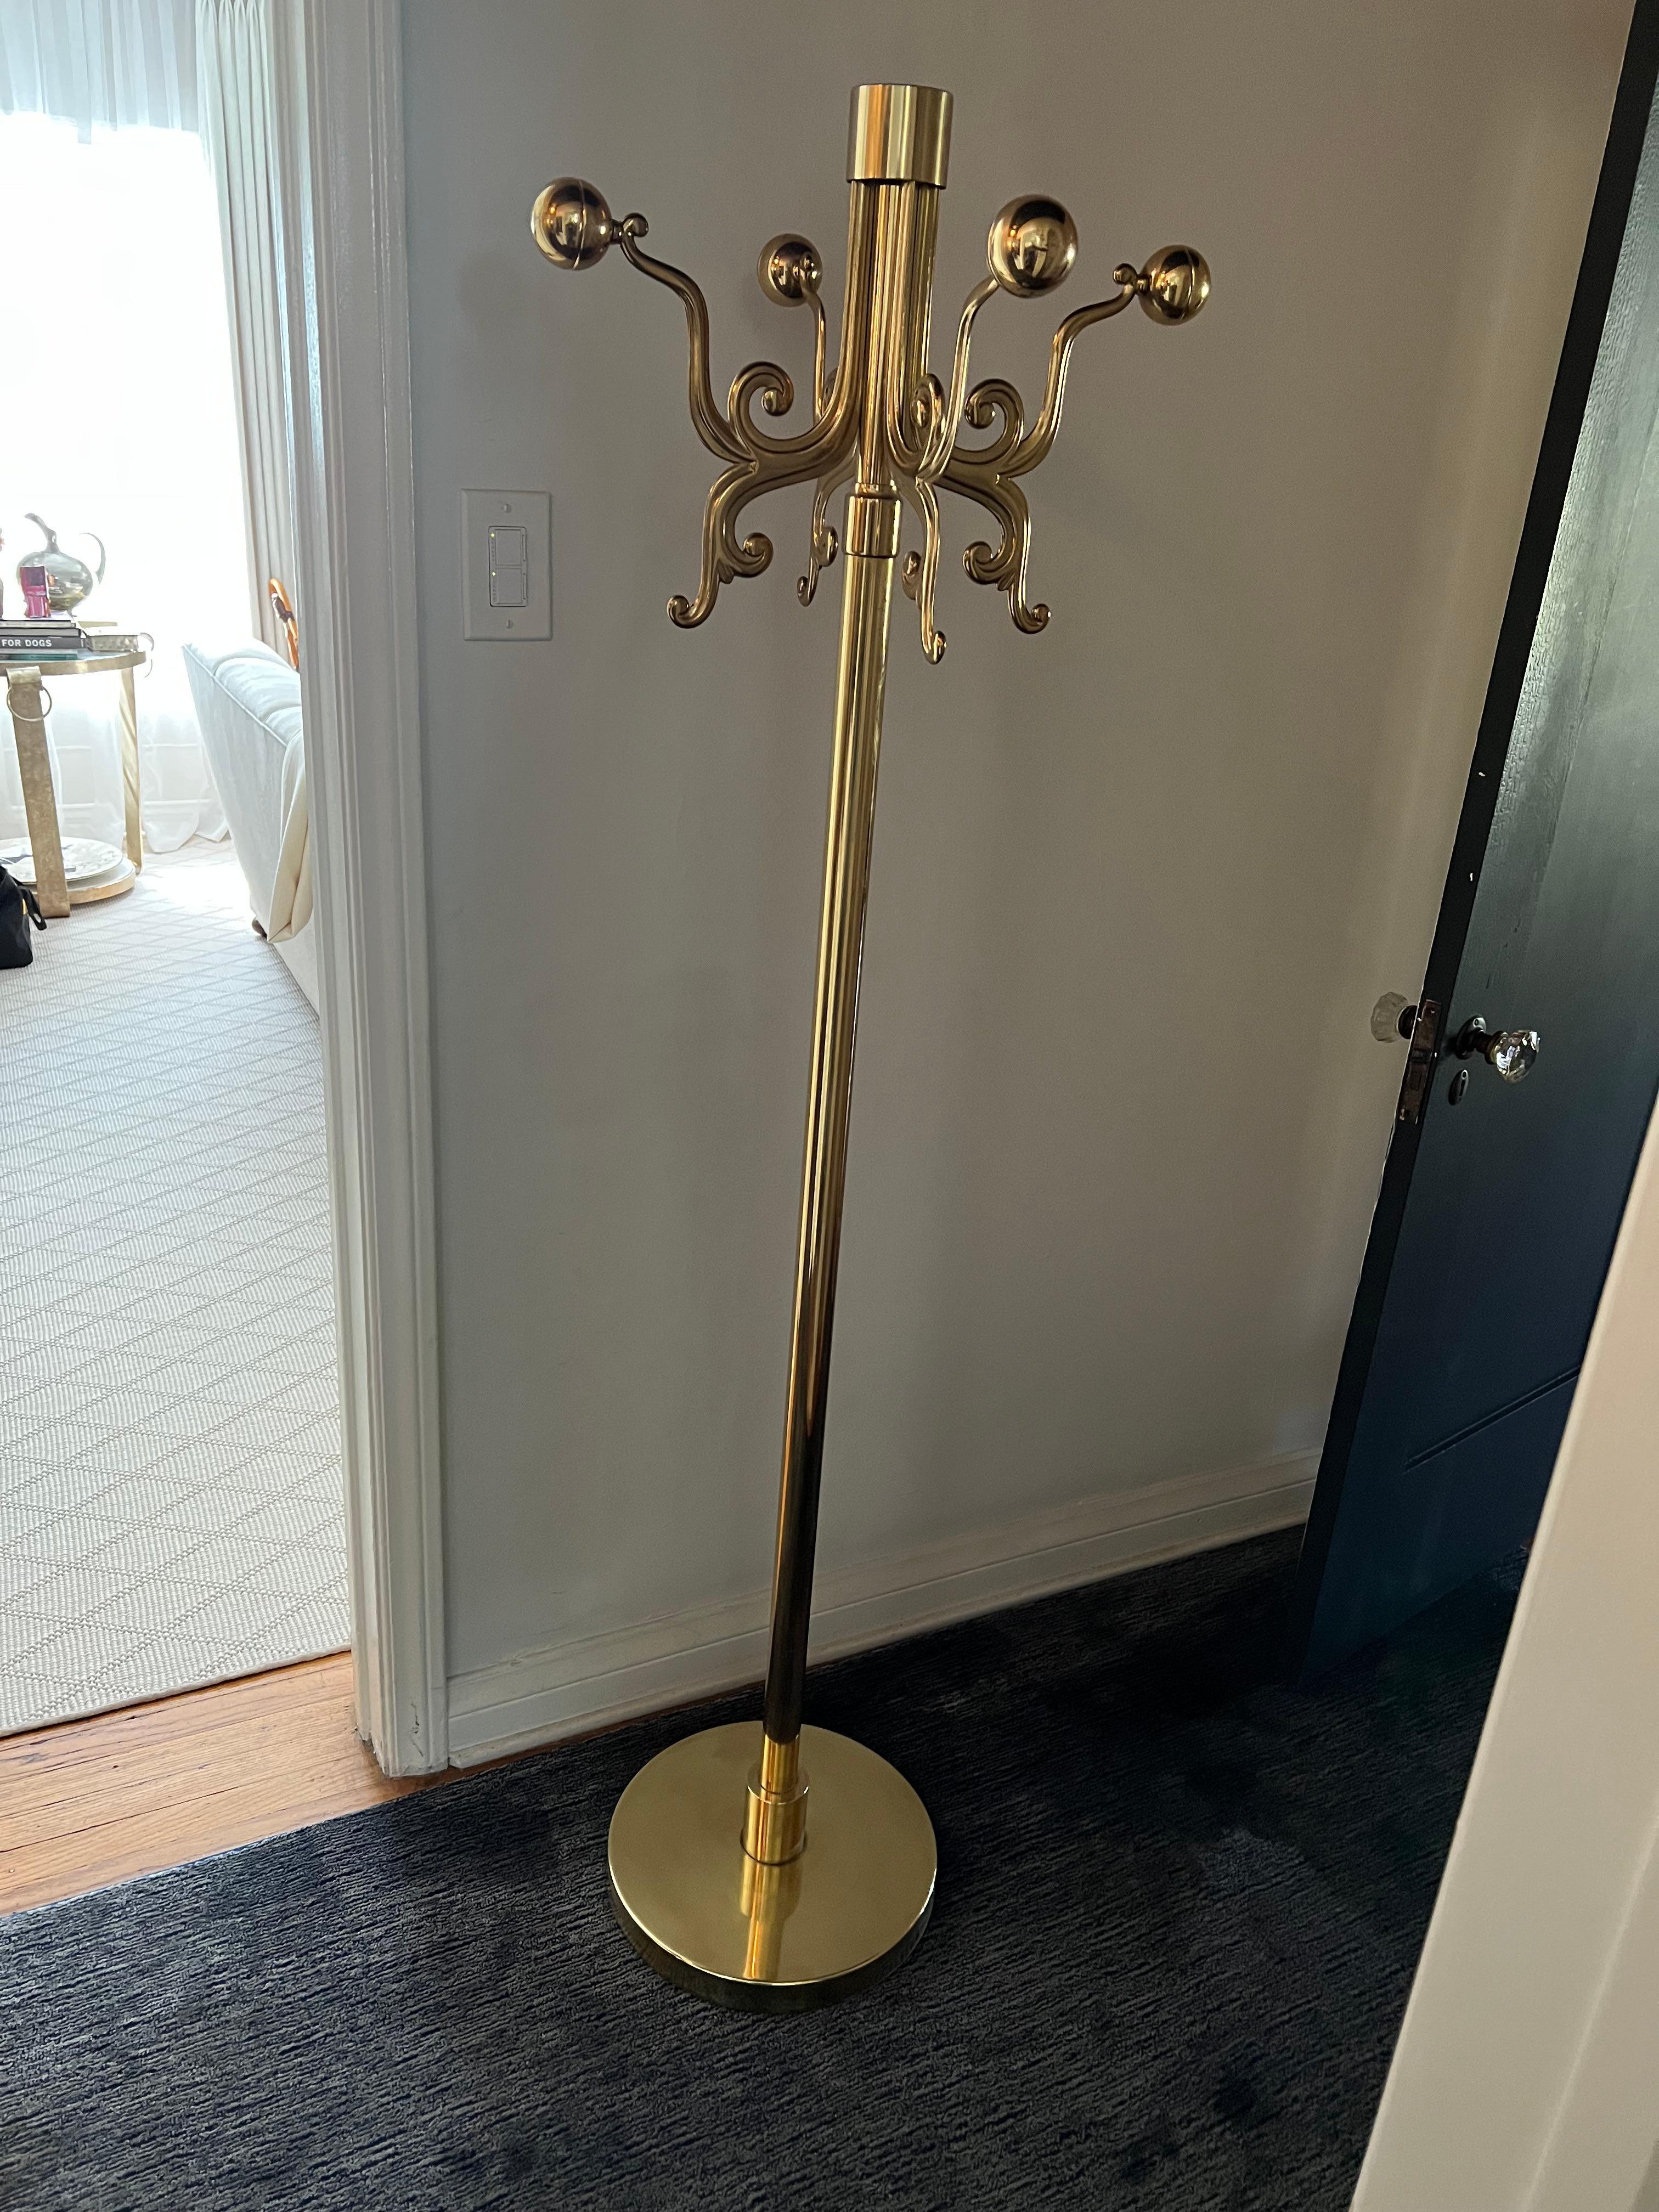 Solid Brass Mid-Century Modern Italian Coat rack or stand. Beautiful Brass with a traditional design brought into a modern look with the design of the arms and spheres at the end of each of the four arms.

The base and shaft are polished brass -